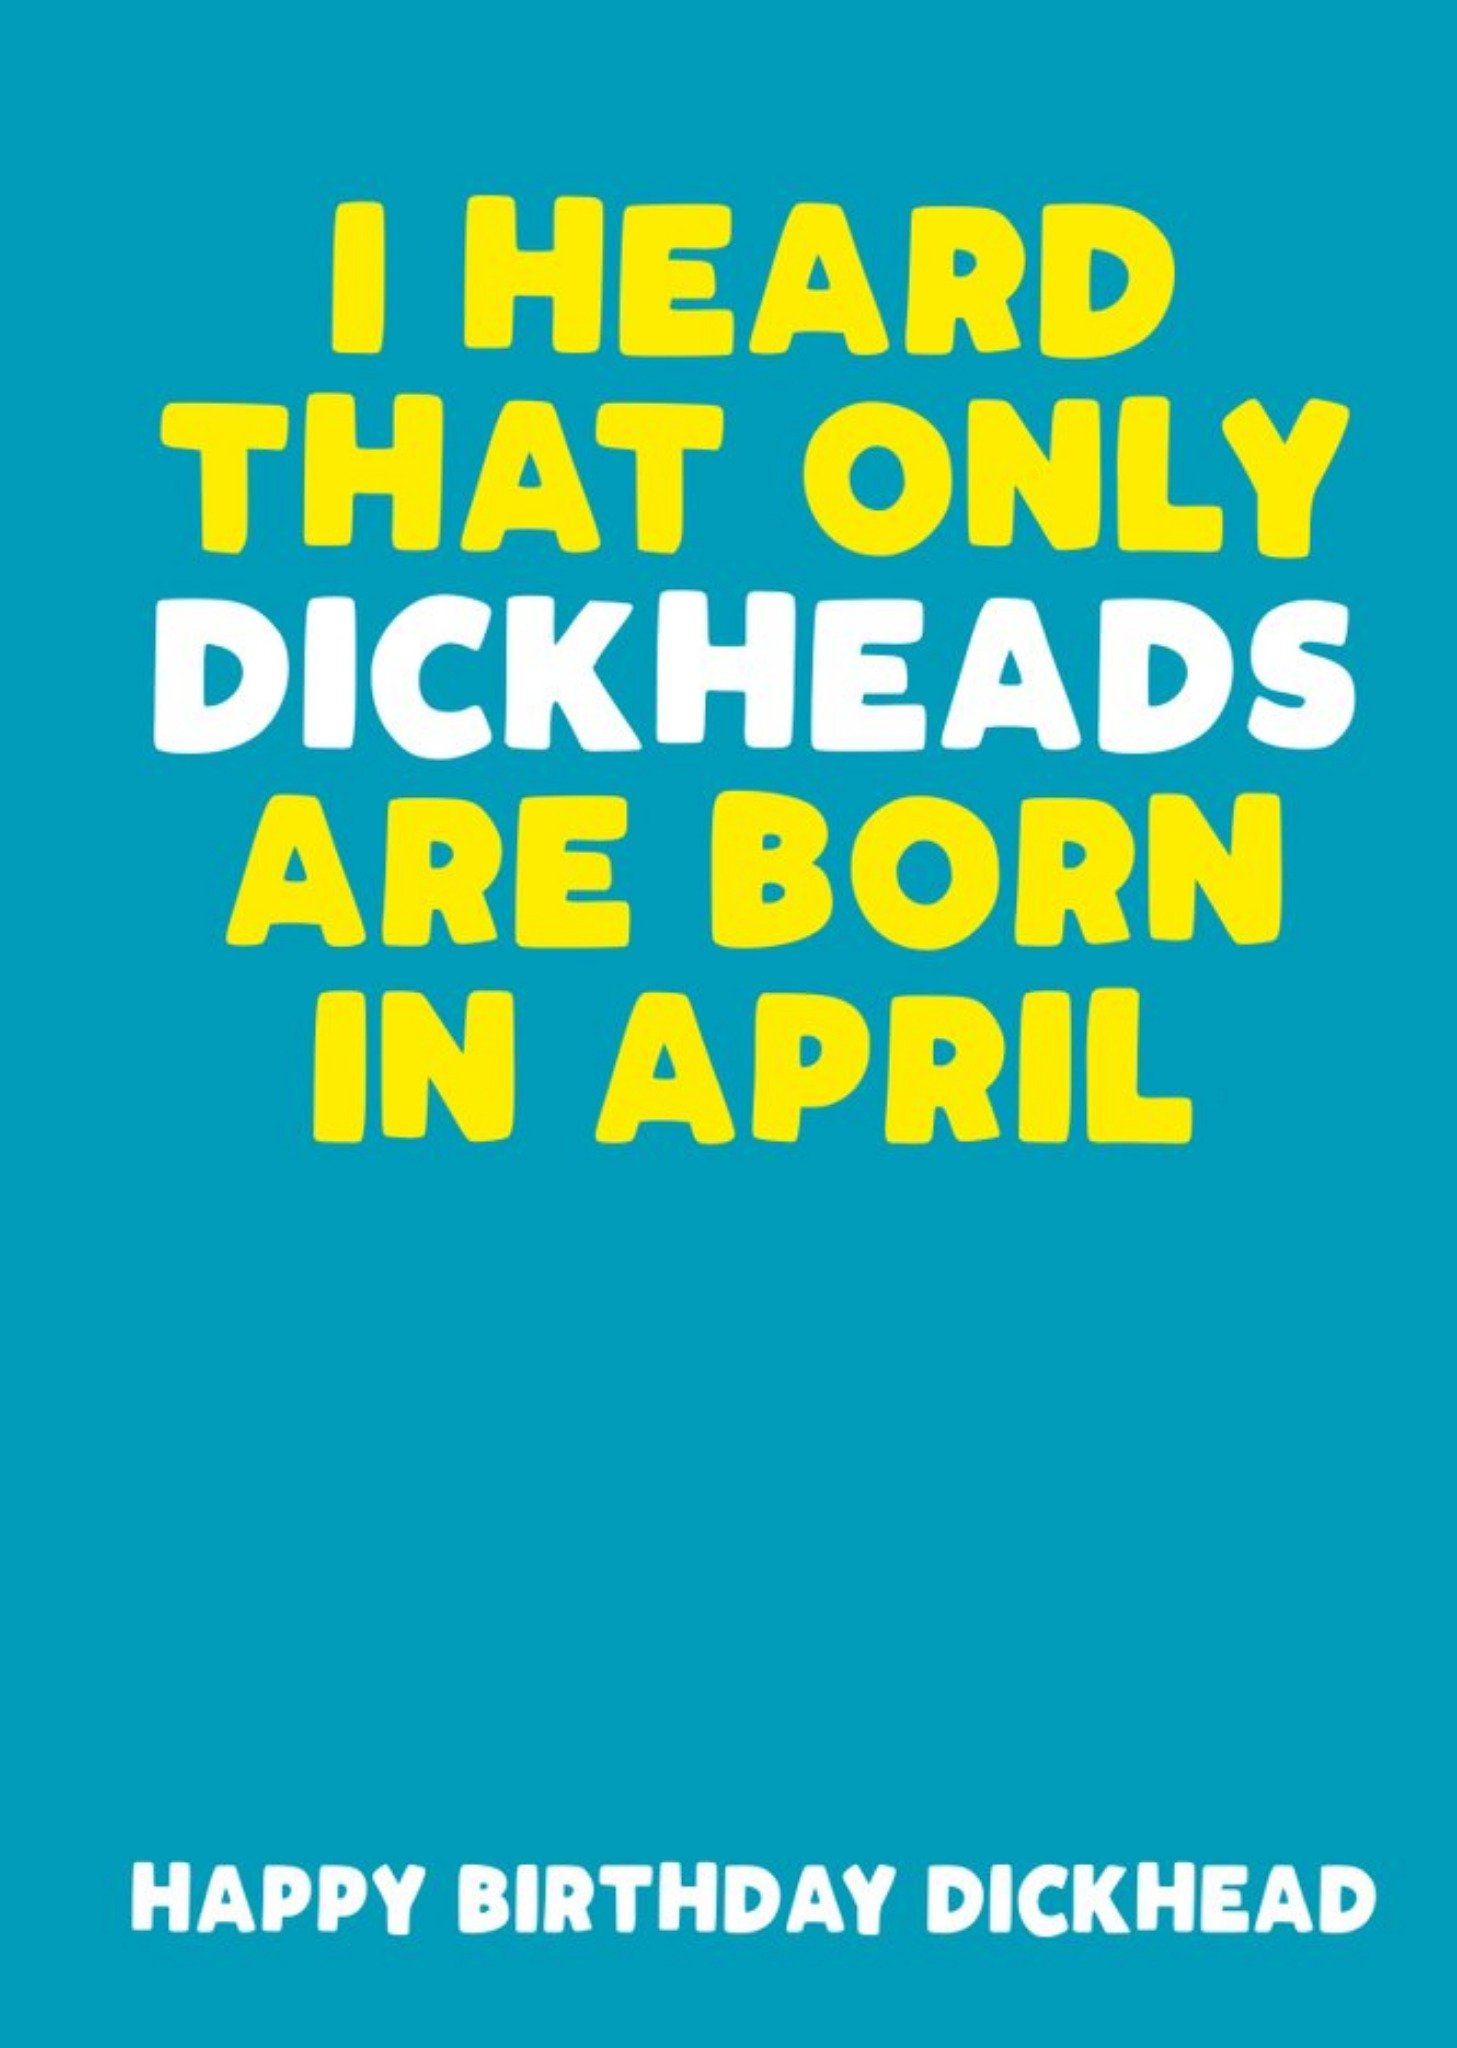 Moonpig I Heard That Only Dickheads Are Born In April Funny Card, Large